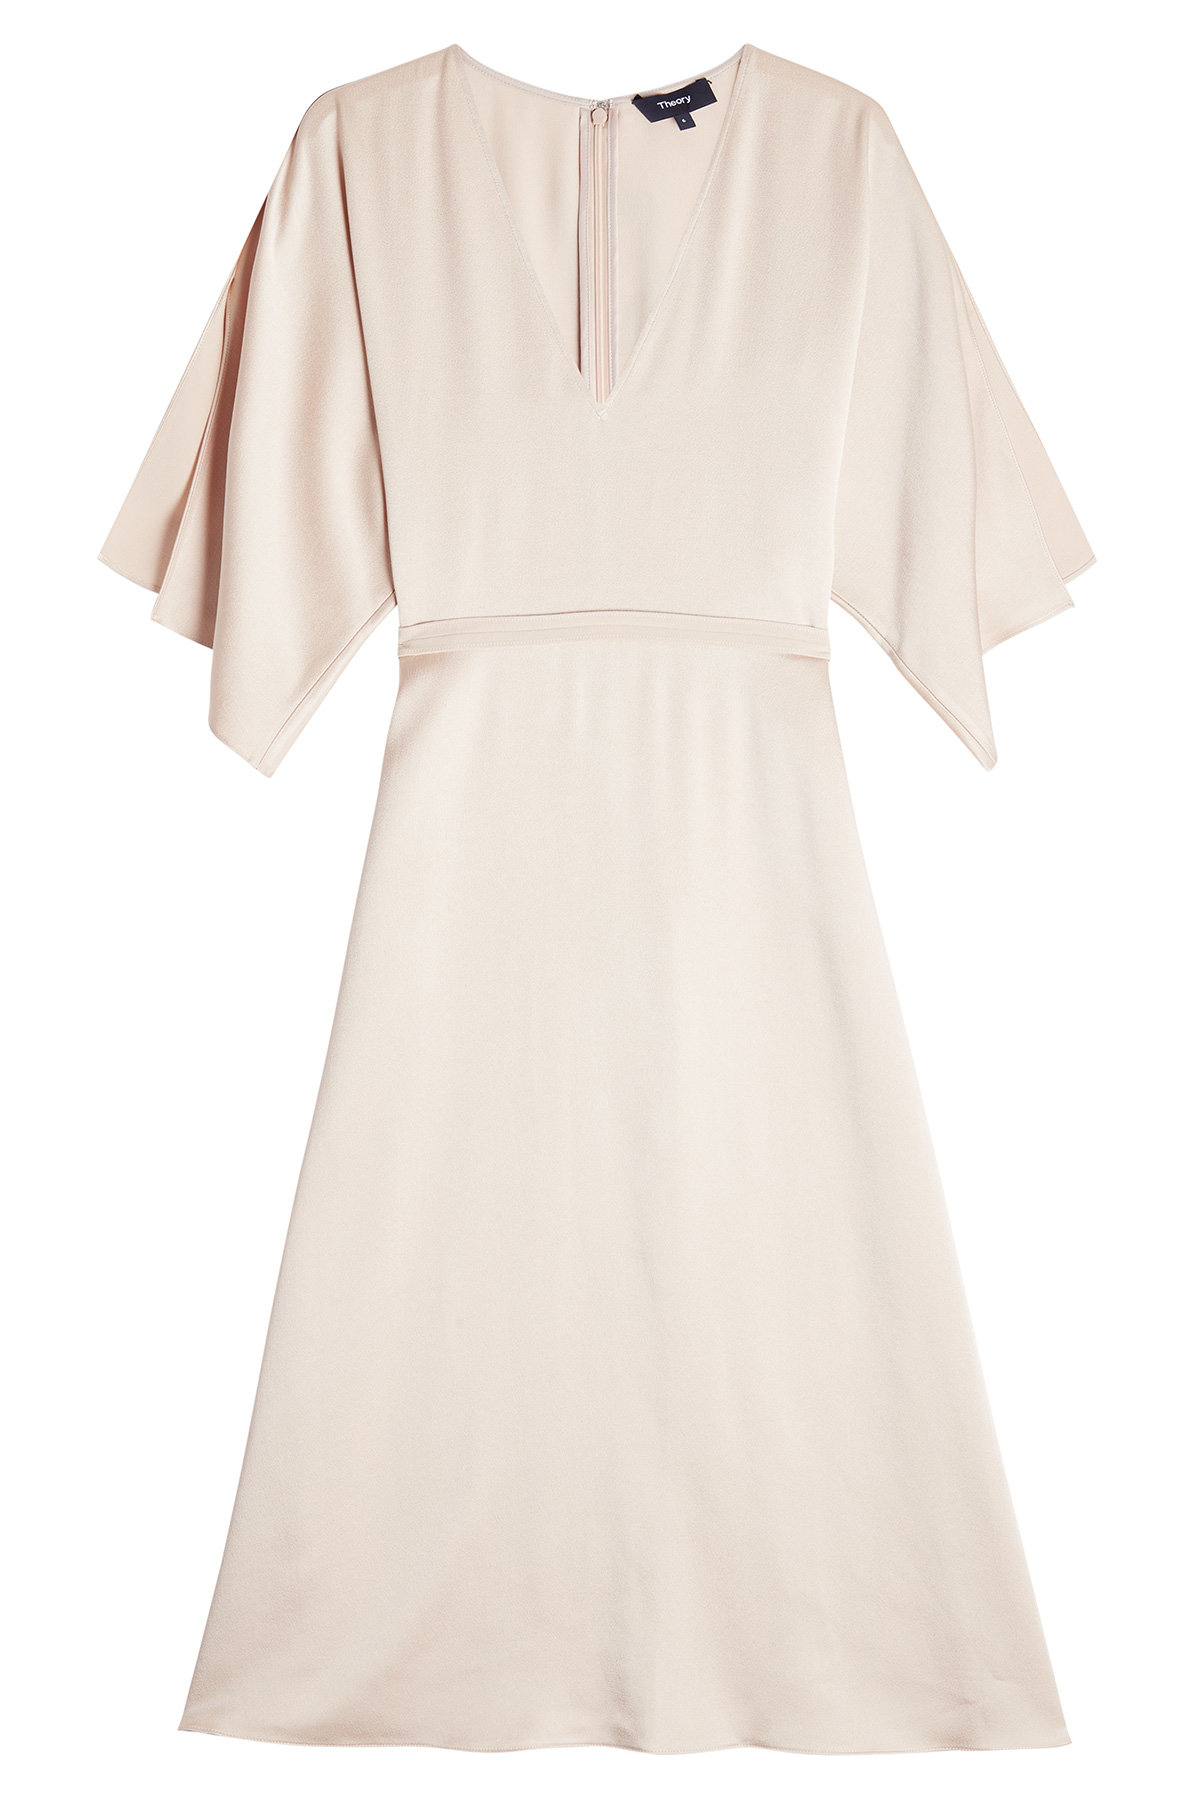 Satin Crepe Dress by Theory